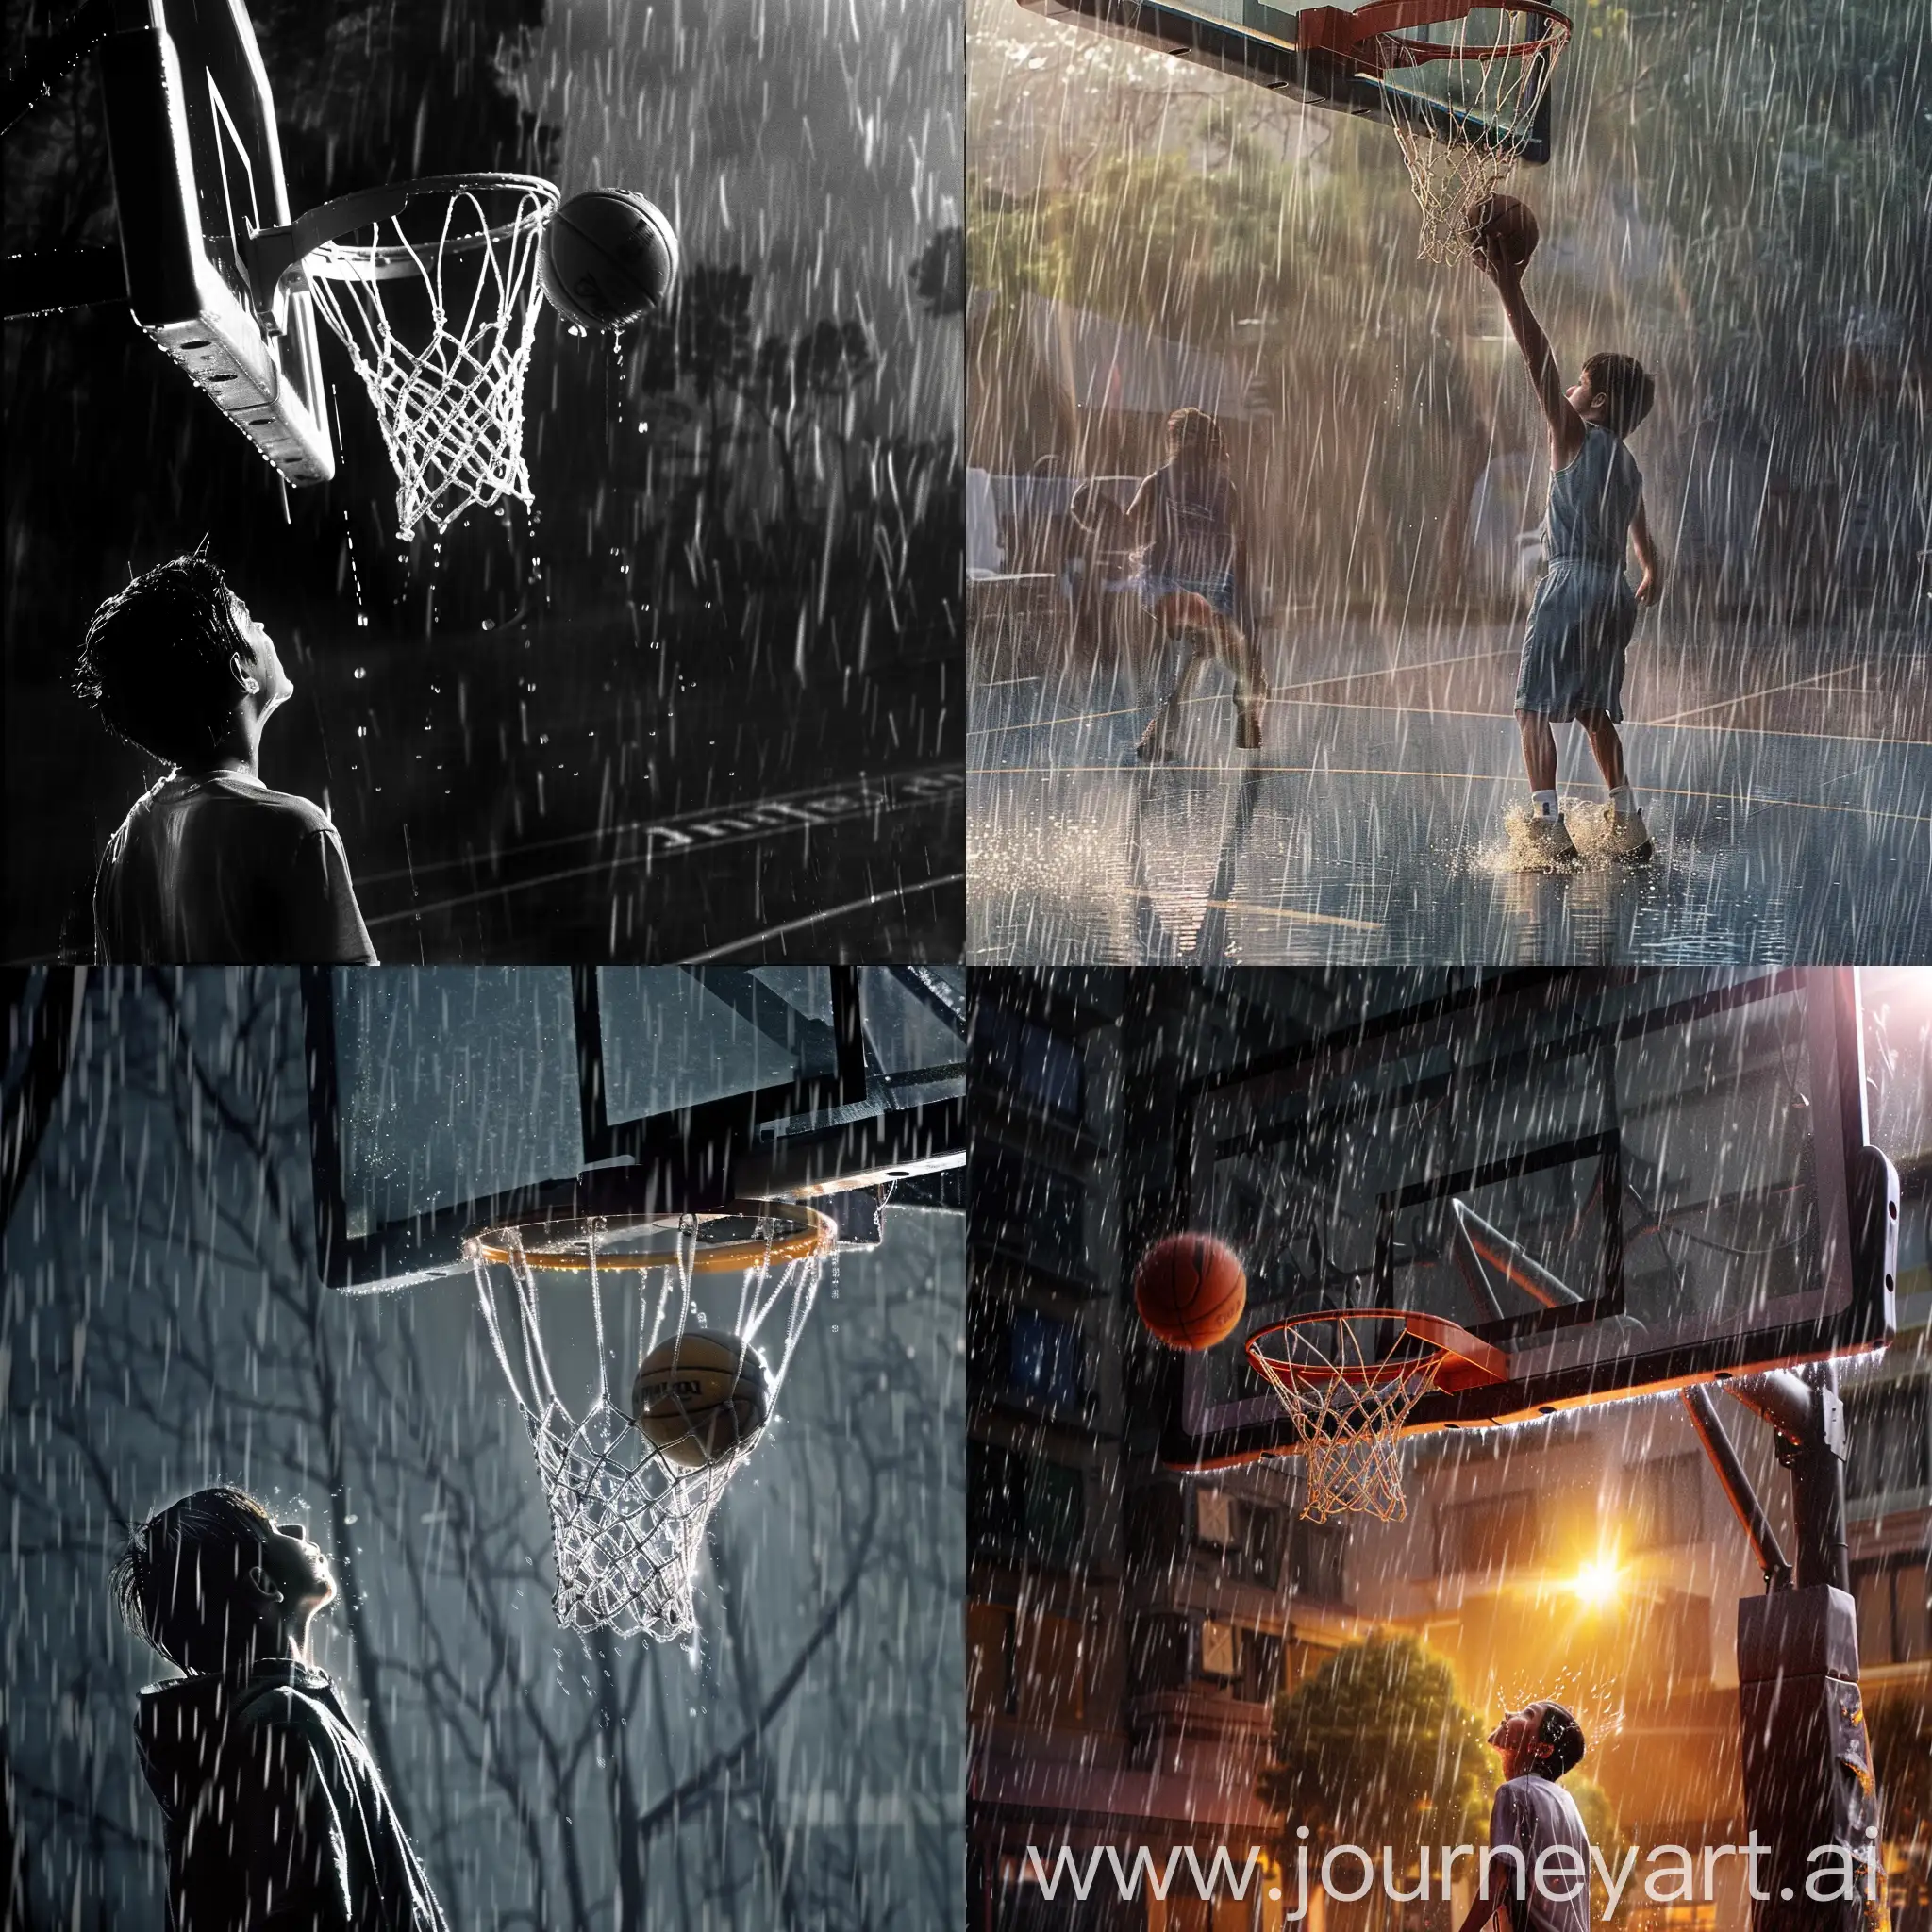 Boy-Playing-Basketball-in-Rainstorm-with-Perfect-Shot